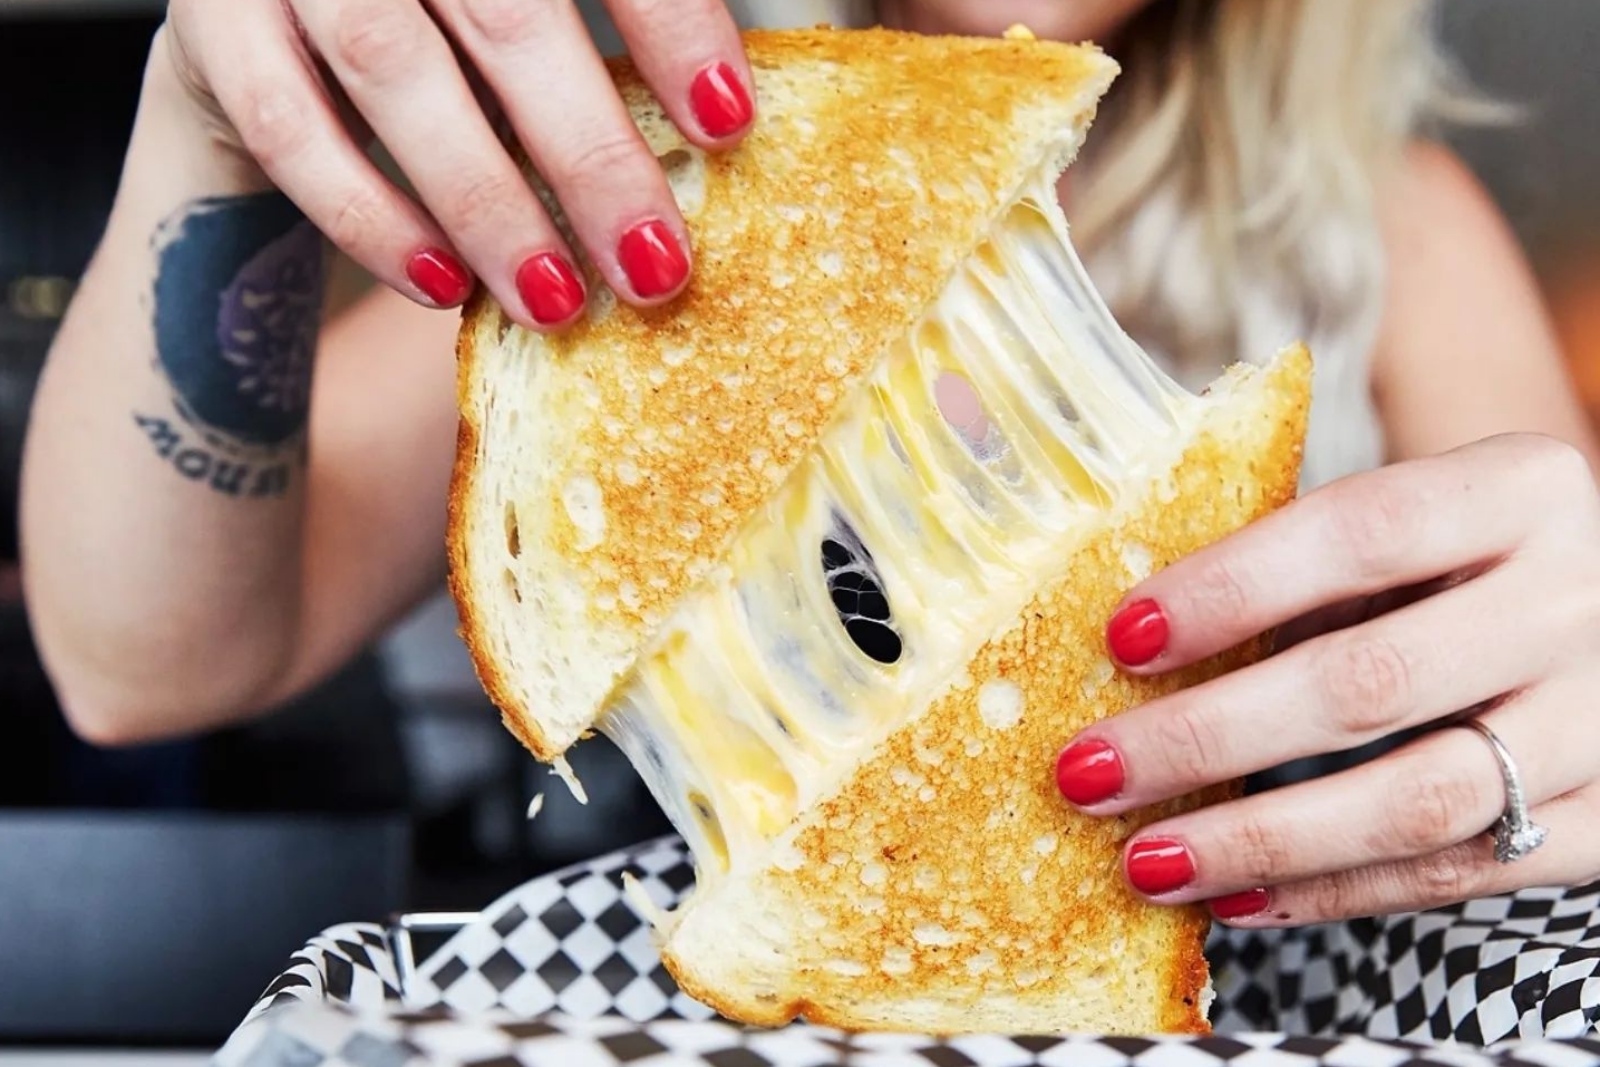 A woman sitting at a table in a restaurant holds a grilled cheese sandwich as the cheese between the slices stretches